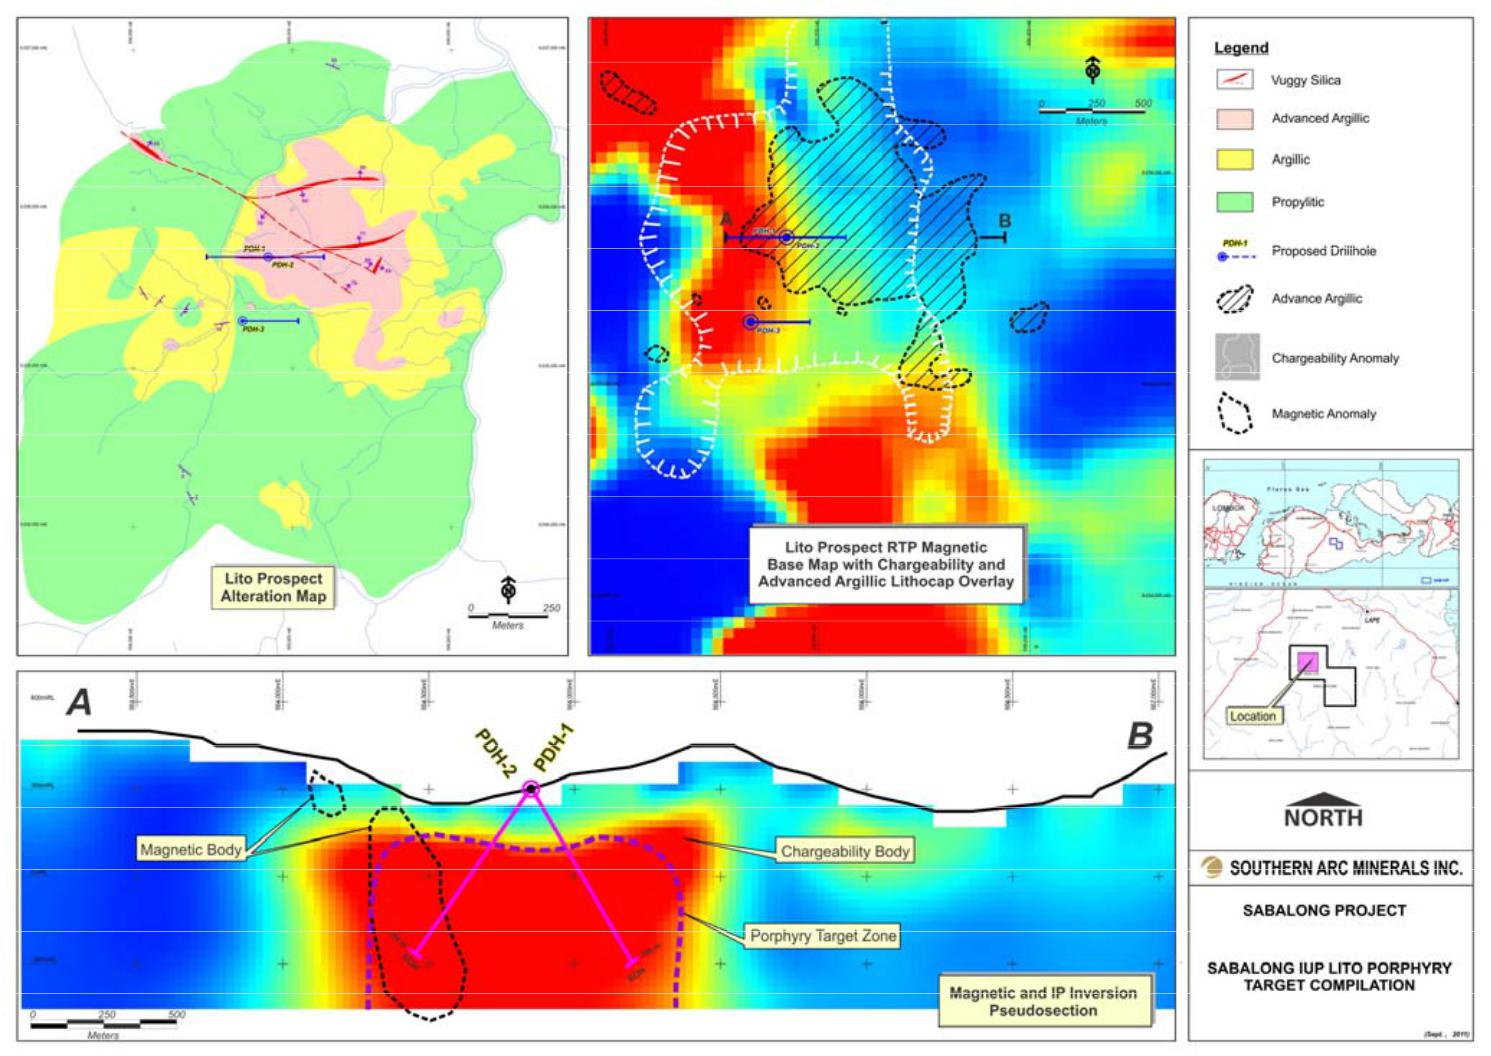 Initial Drill Hole Locations for Sabalong Phase 1 Drilling Program